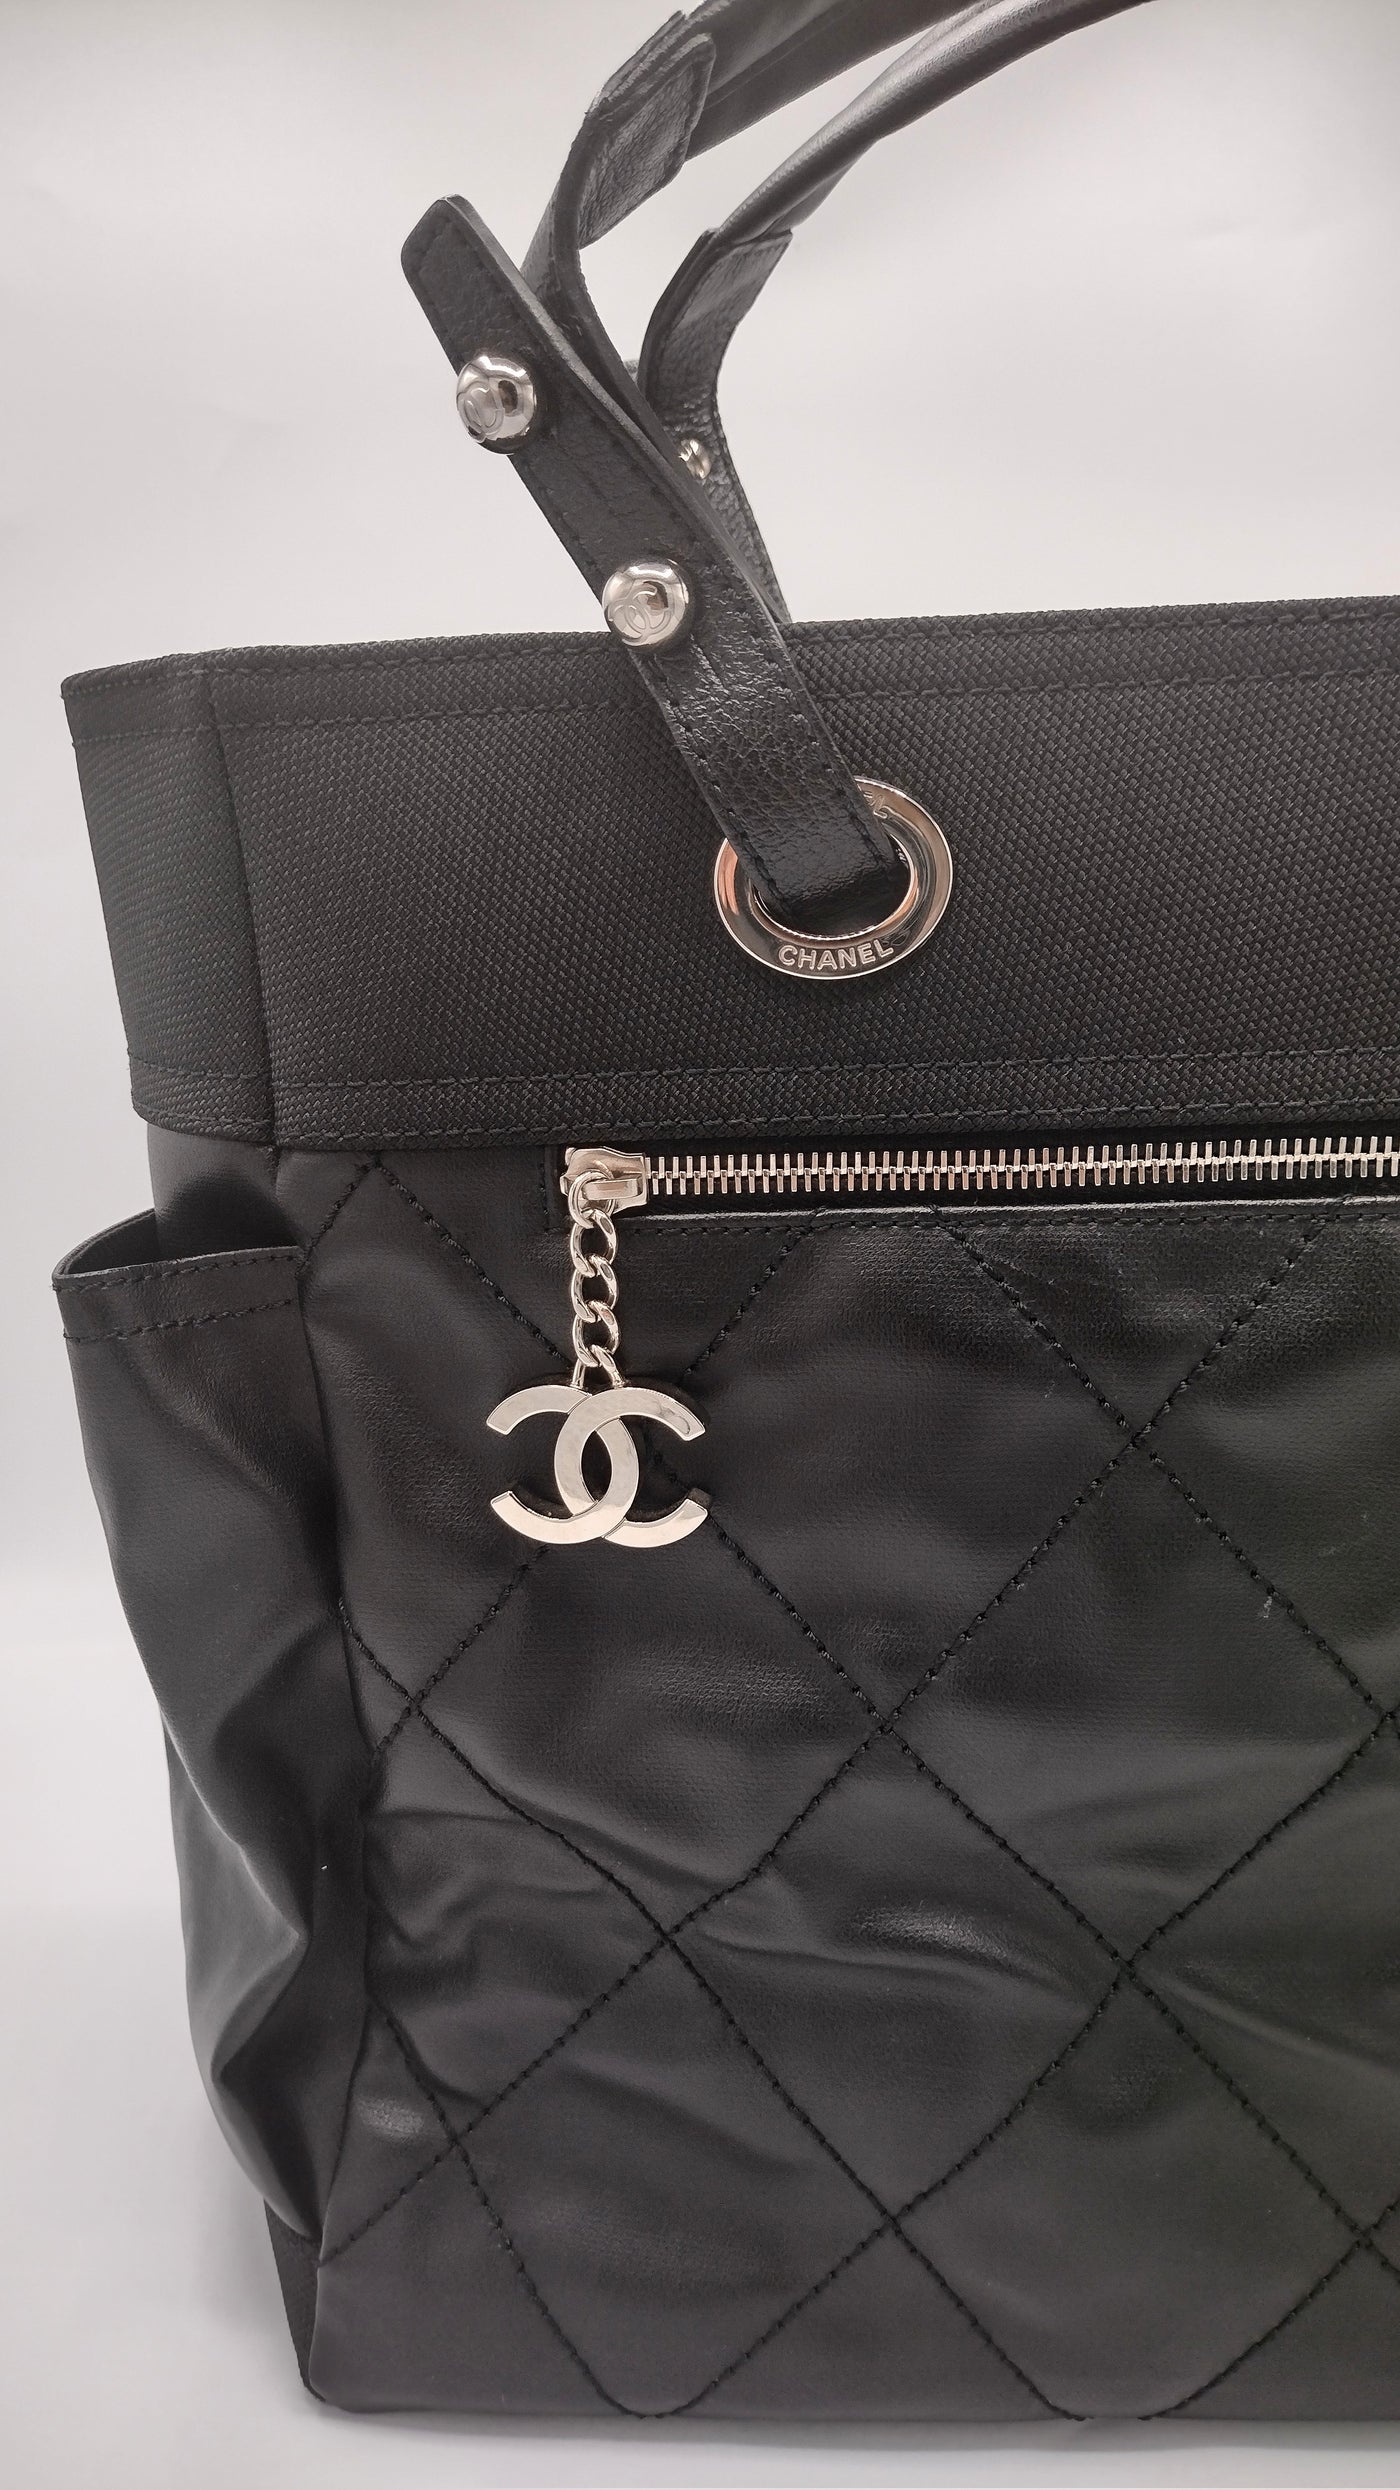 CHANEL Paris Biarritz travel collection grand tote bag - Never Worn